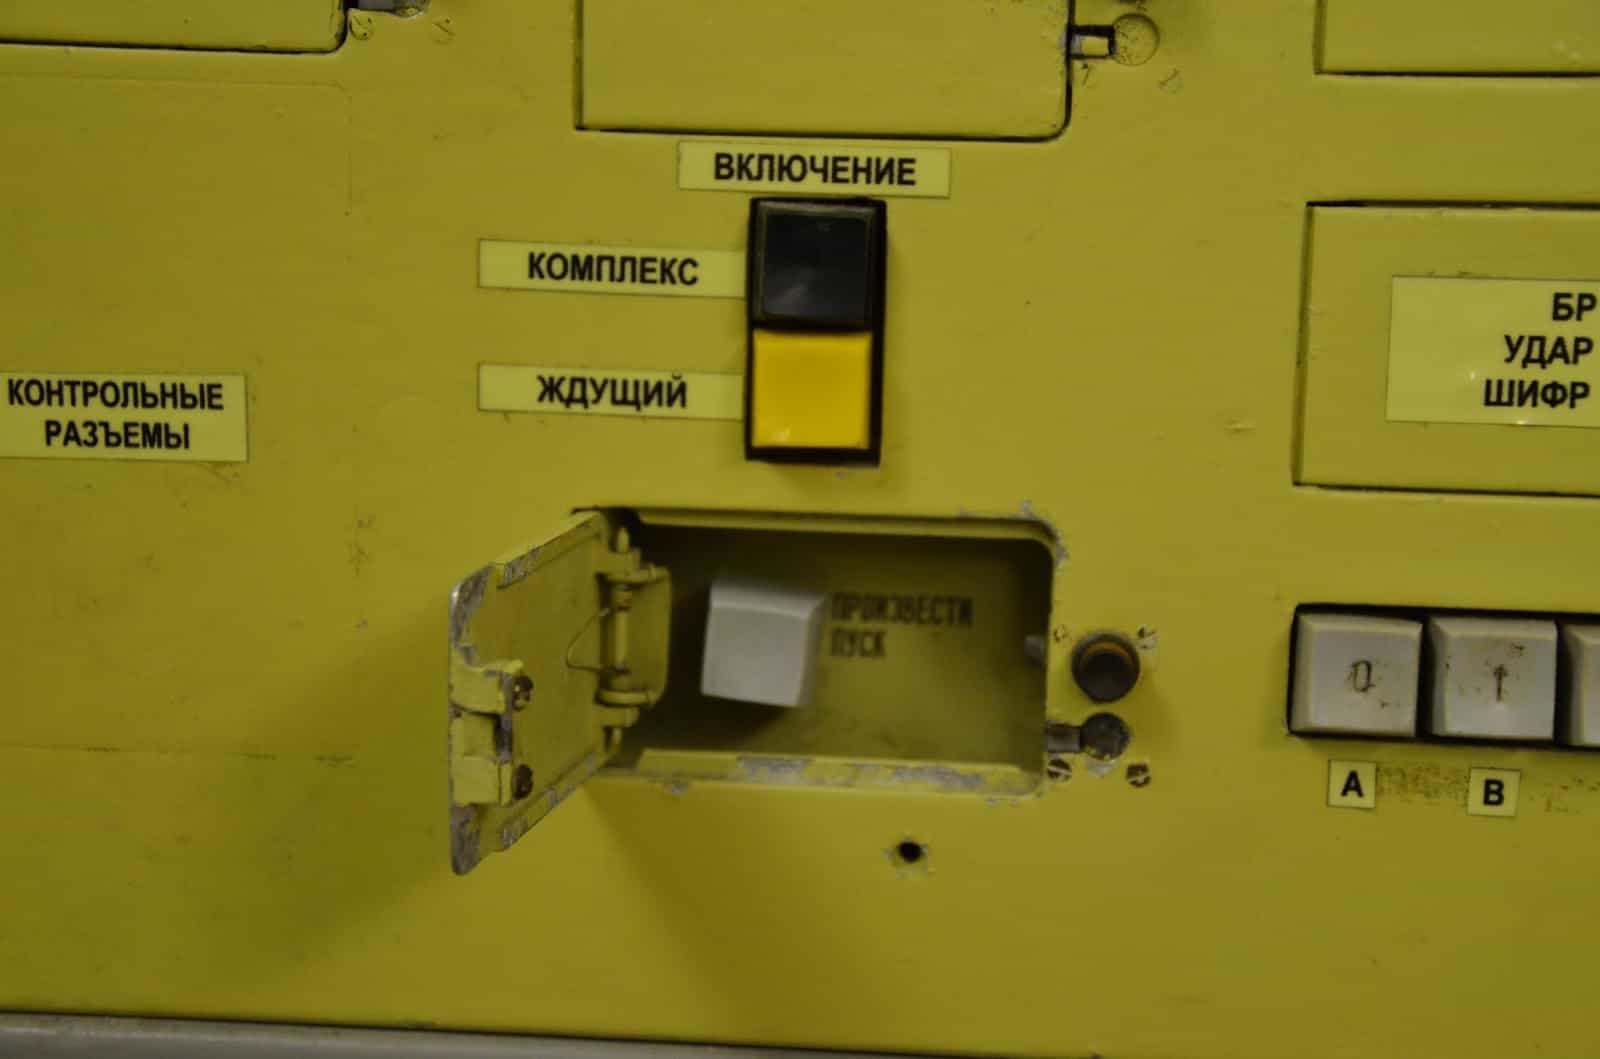 The red button – it was actually gray in Unified Command Center at Strategic Missile Forces Museum near Pobuzke, Ukraine